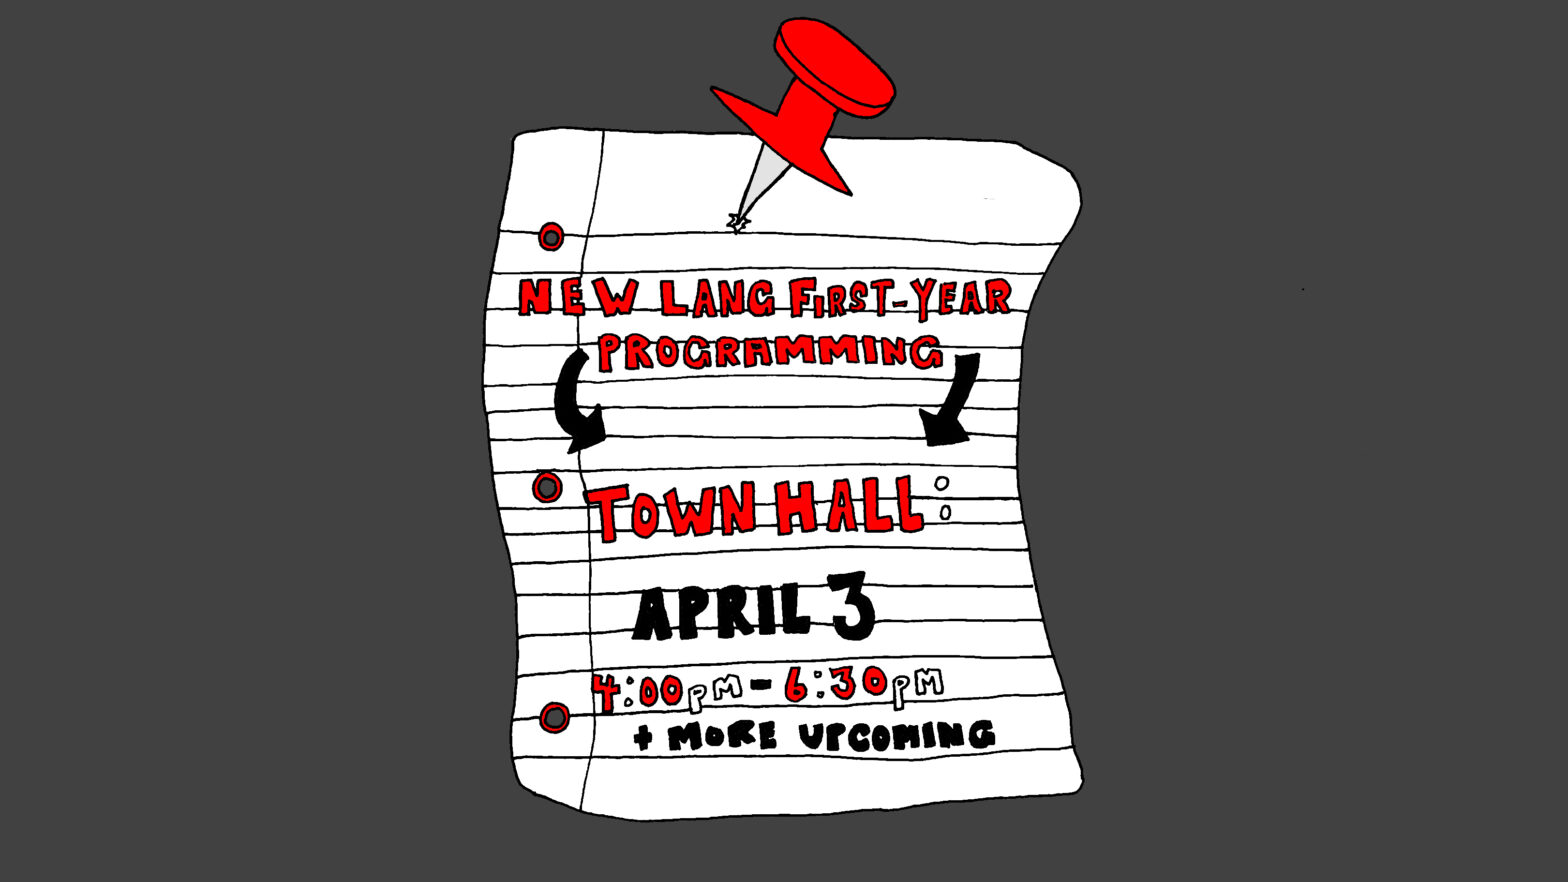 A white piece of notebook paper is pinned to a dark gray wall with a large red pushpin. It has the words “New Lang First Year Programming” in red, with two black arrows pointing to the words “Town Hall”, also in red. Below that, the sign reads “April 3” in black, then “4:00 pm to 6:30 pm” in red and white. The final line says “+ more upcoming” in black.